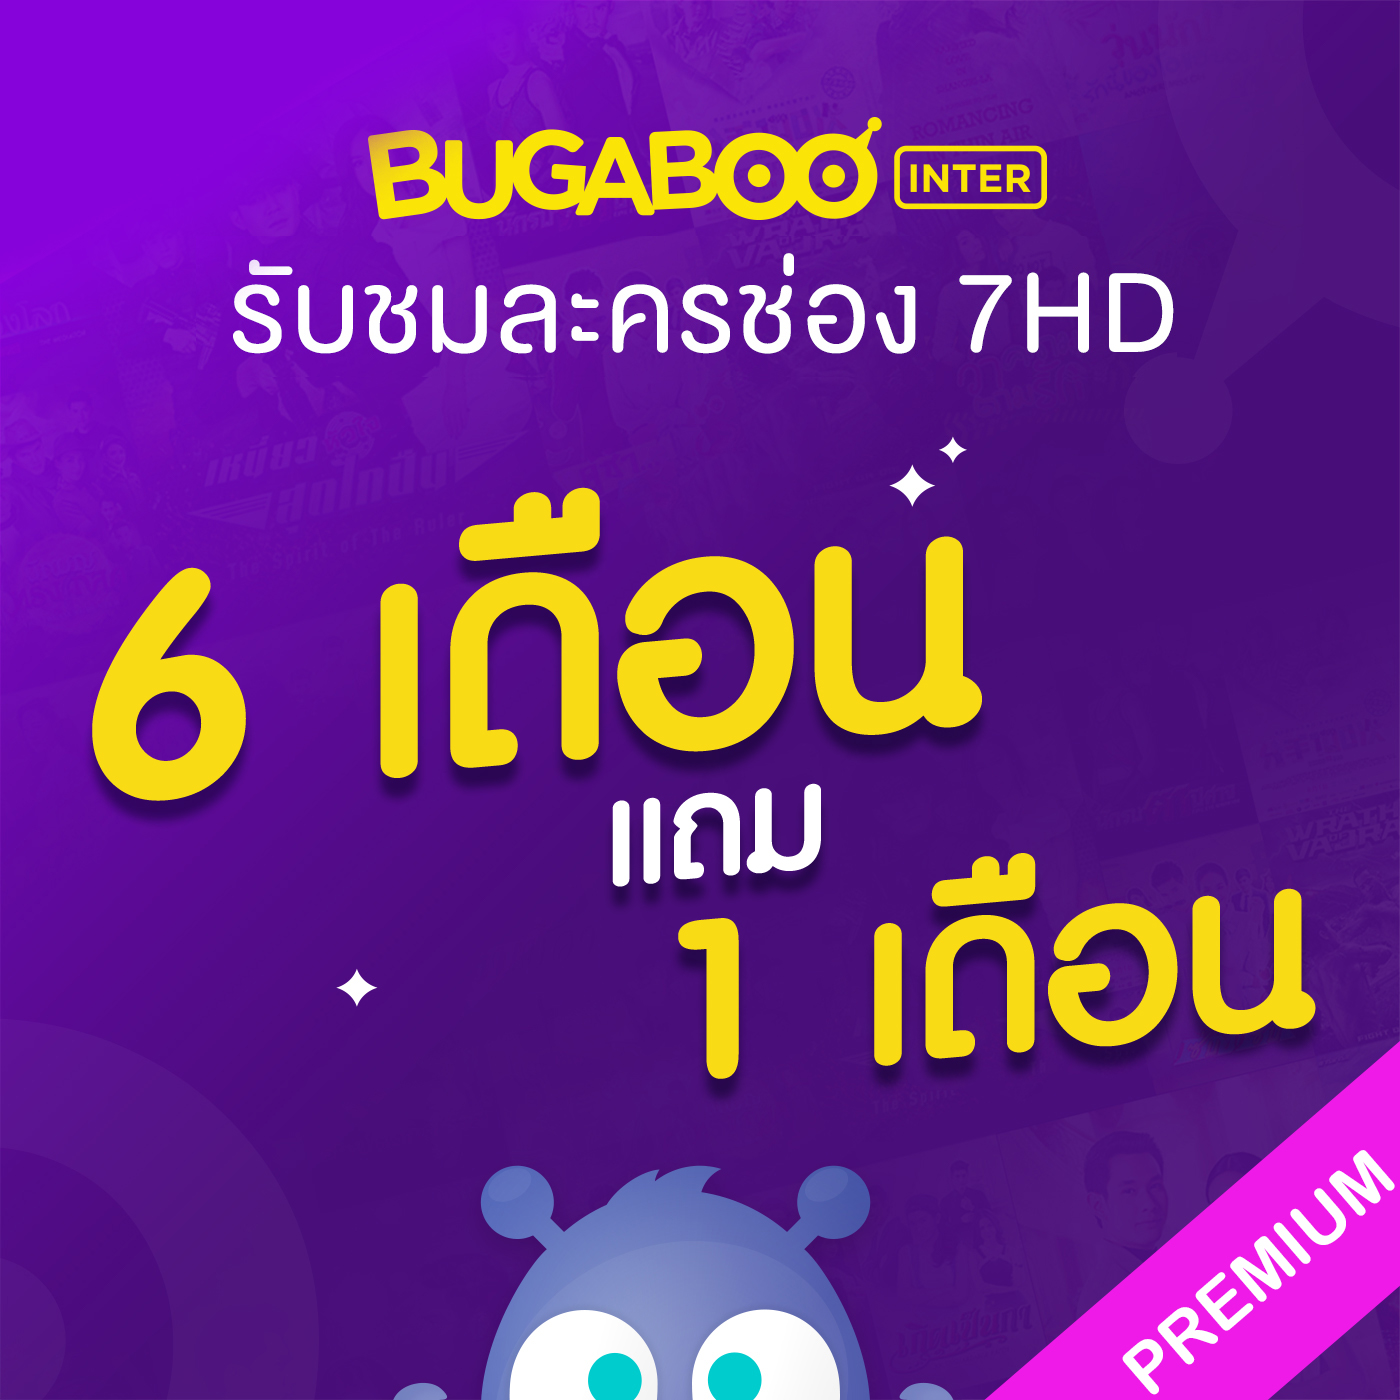 [E-Coupon] BUGABOO INTER 6 Months Free 1 Month